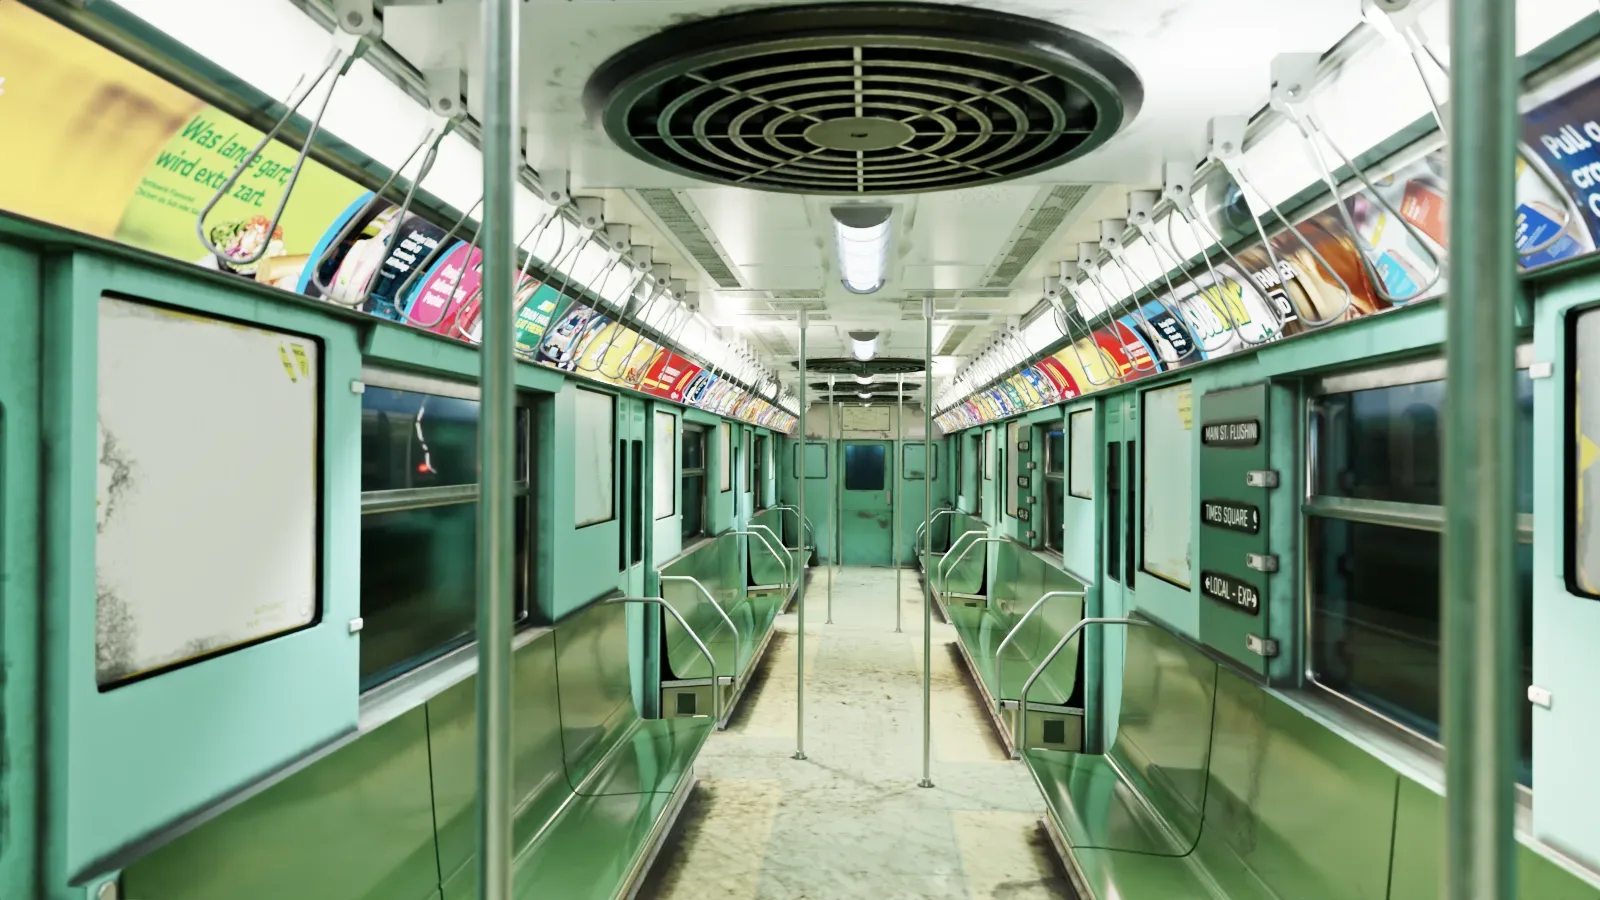 NYC Subway Car Interior -  The seventies -High Detailed